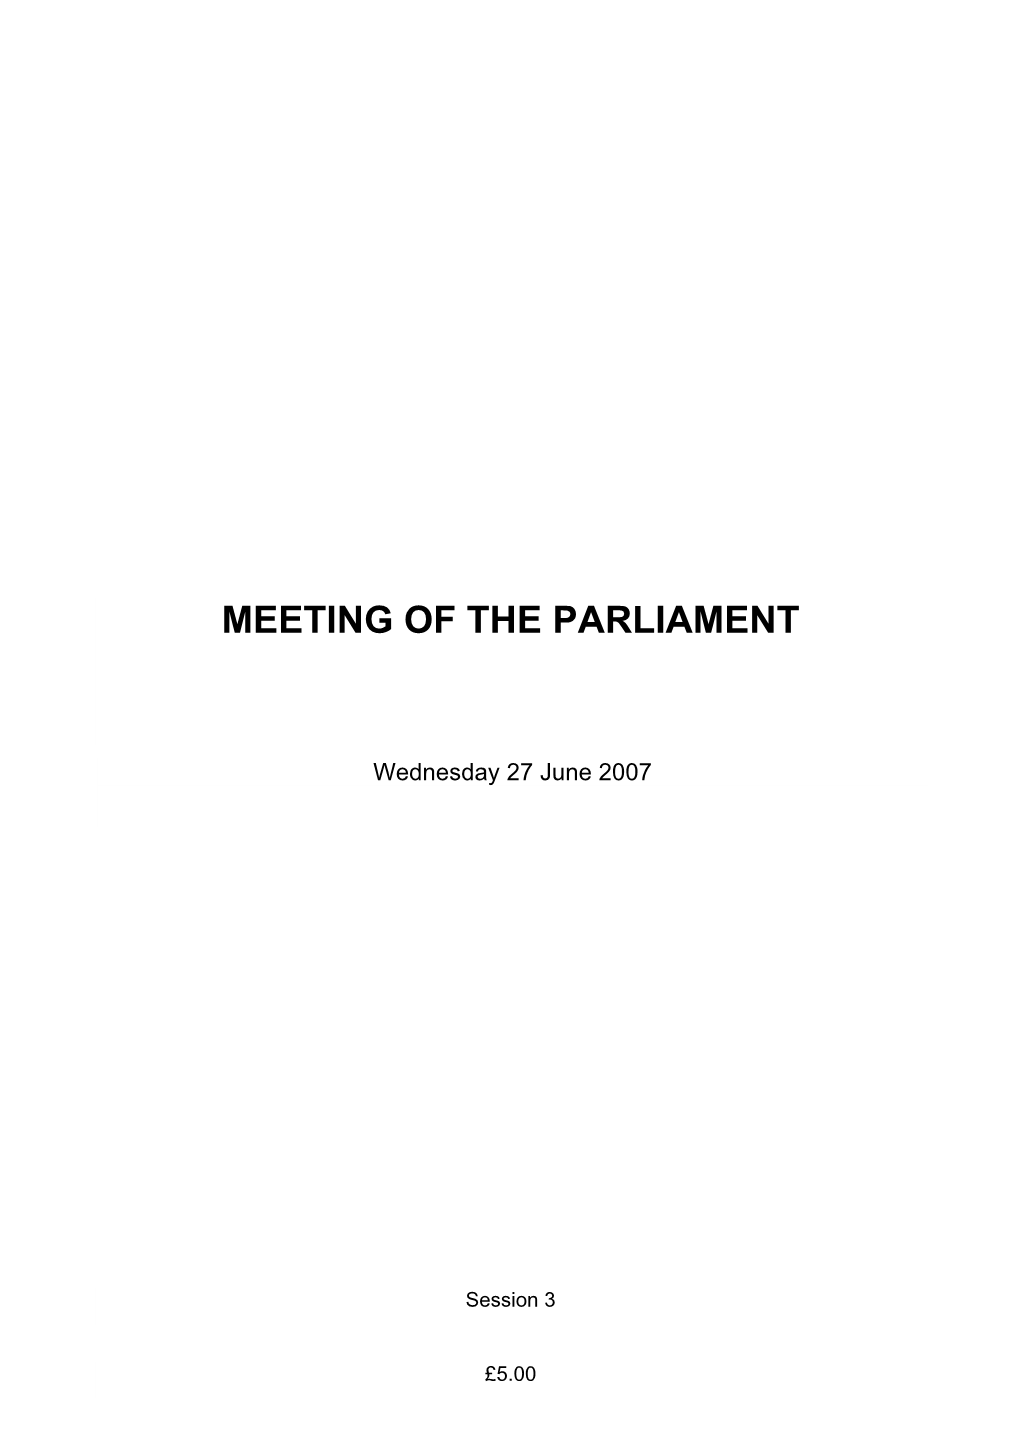 Official Report, 7 June 2007; C 460.] Motion Agreed To